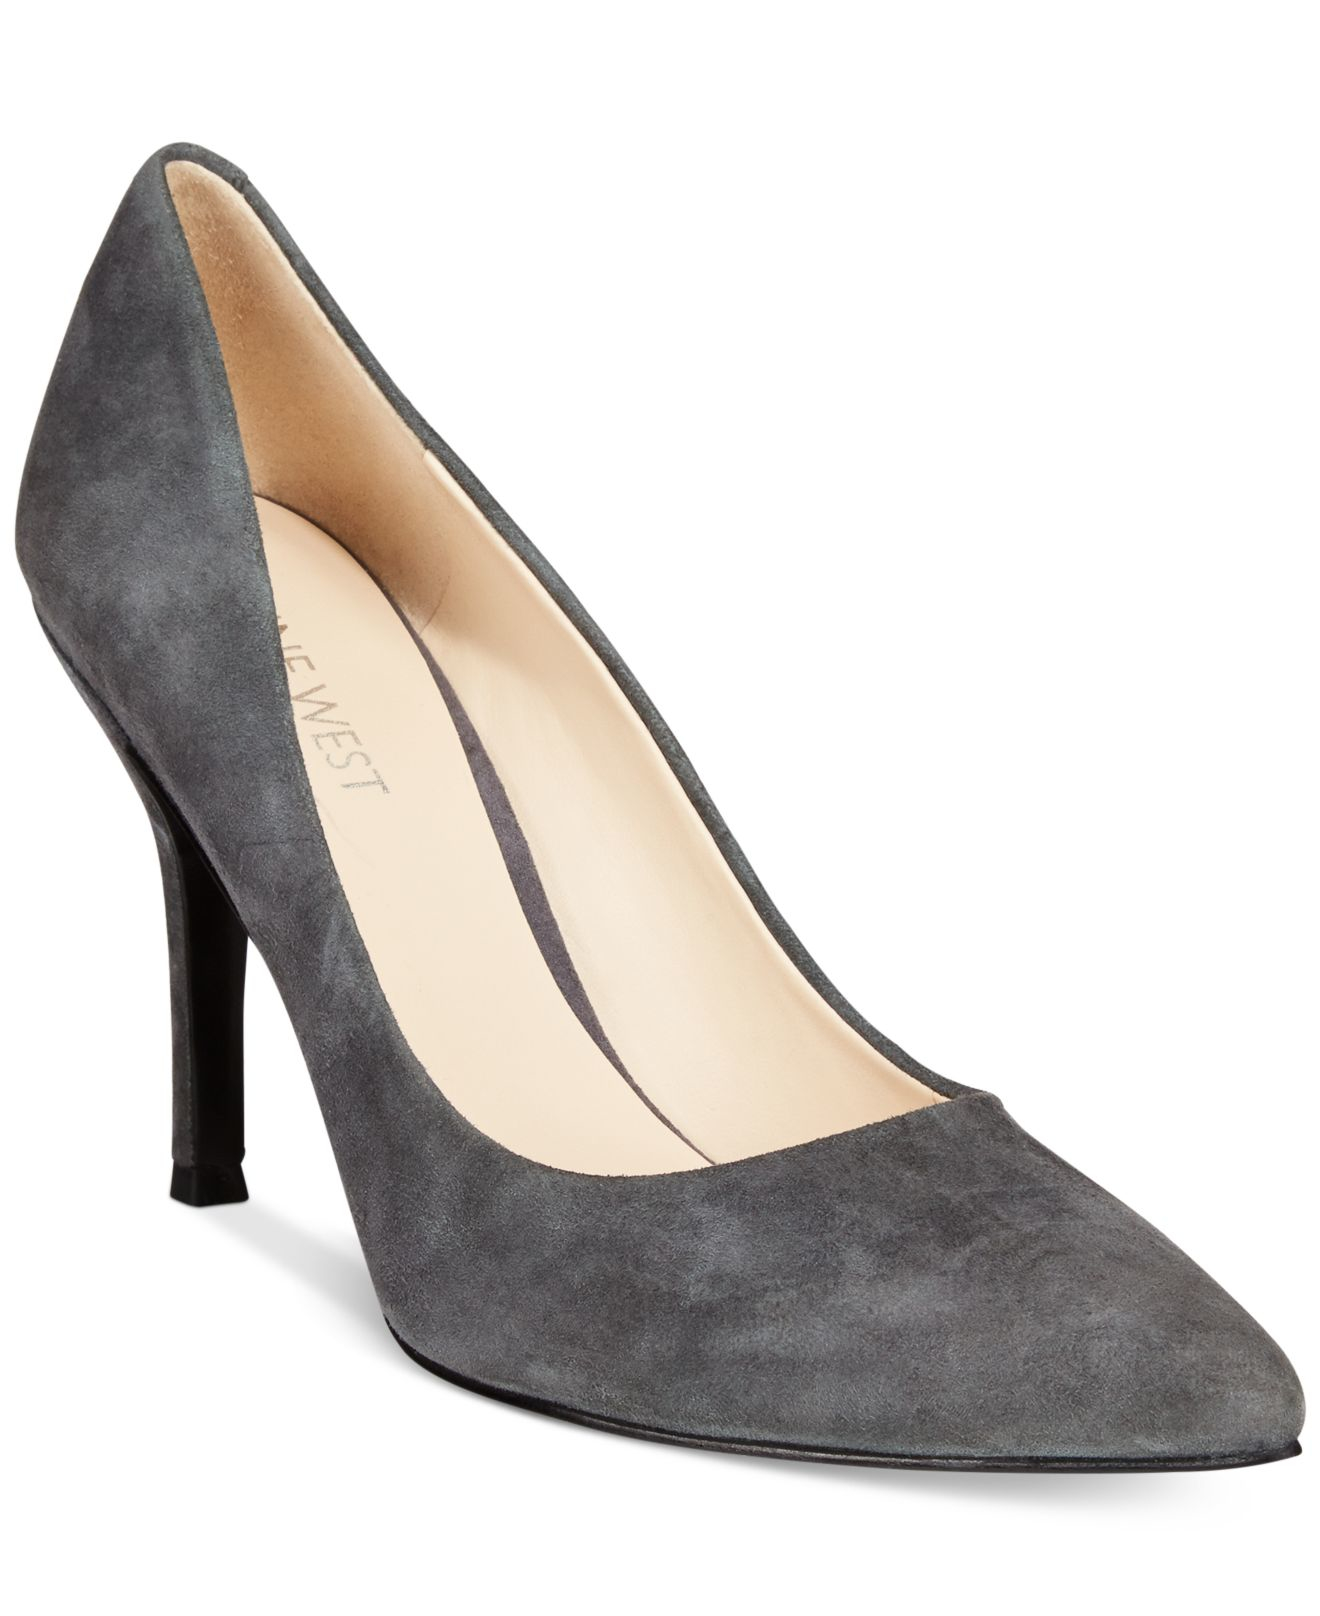 Nine West Flax Suede Pointed Toe Pumps in Graphite Suede (Gray) - Lyst